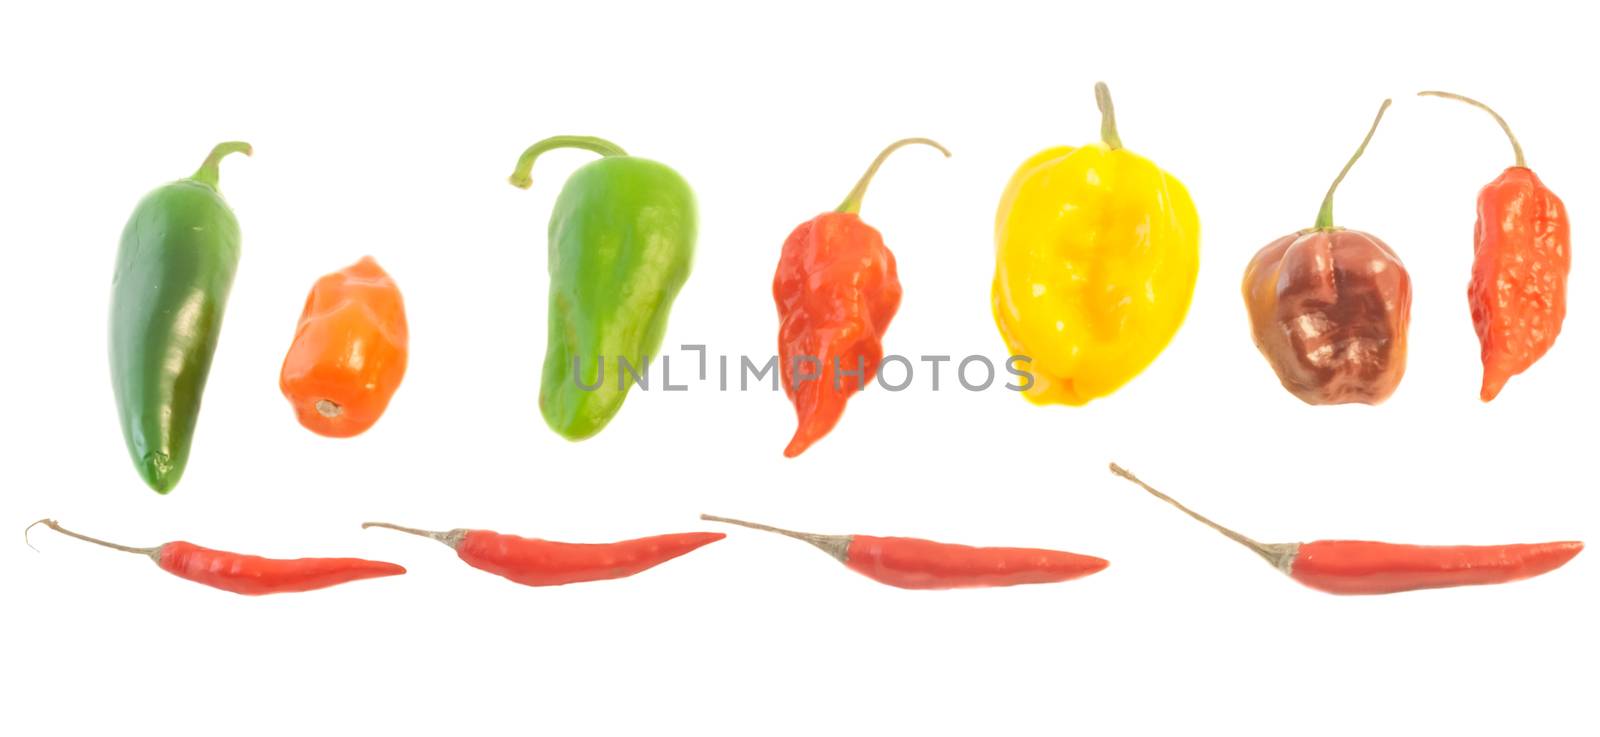 beautiful variety of american chilli in a white background